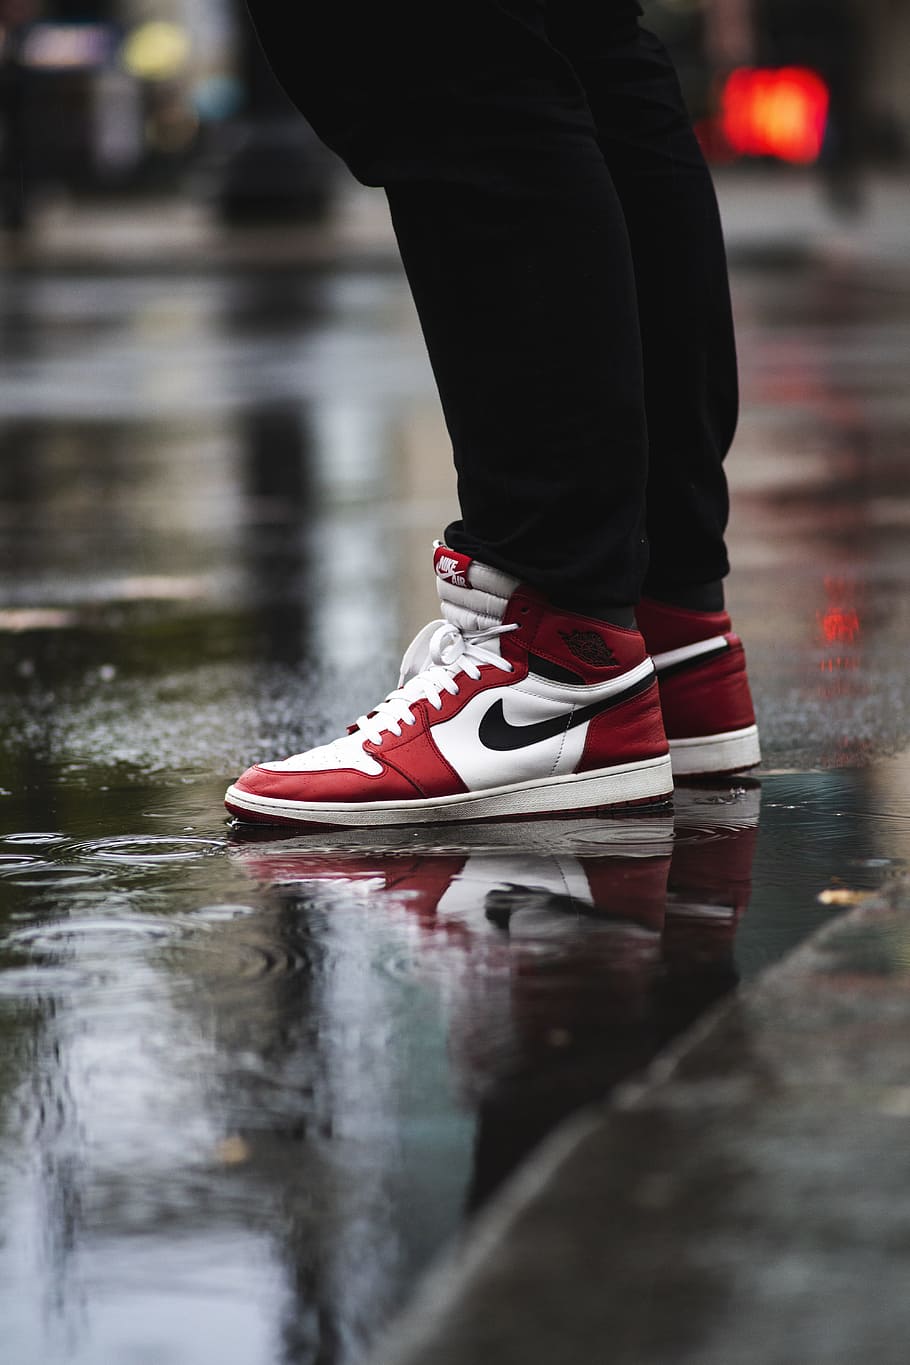 HD wallpaper: selective focus photography of person wearing white-red-and-black Air Jordan Chicago | Wallpaper Flare